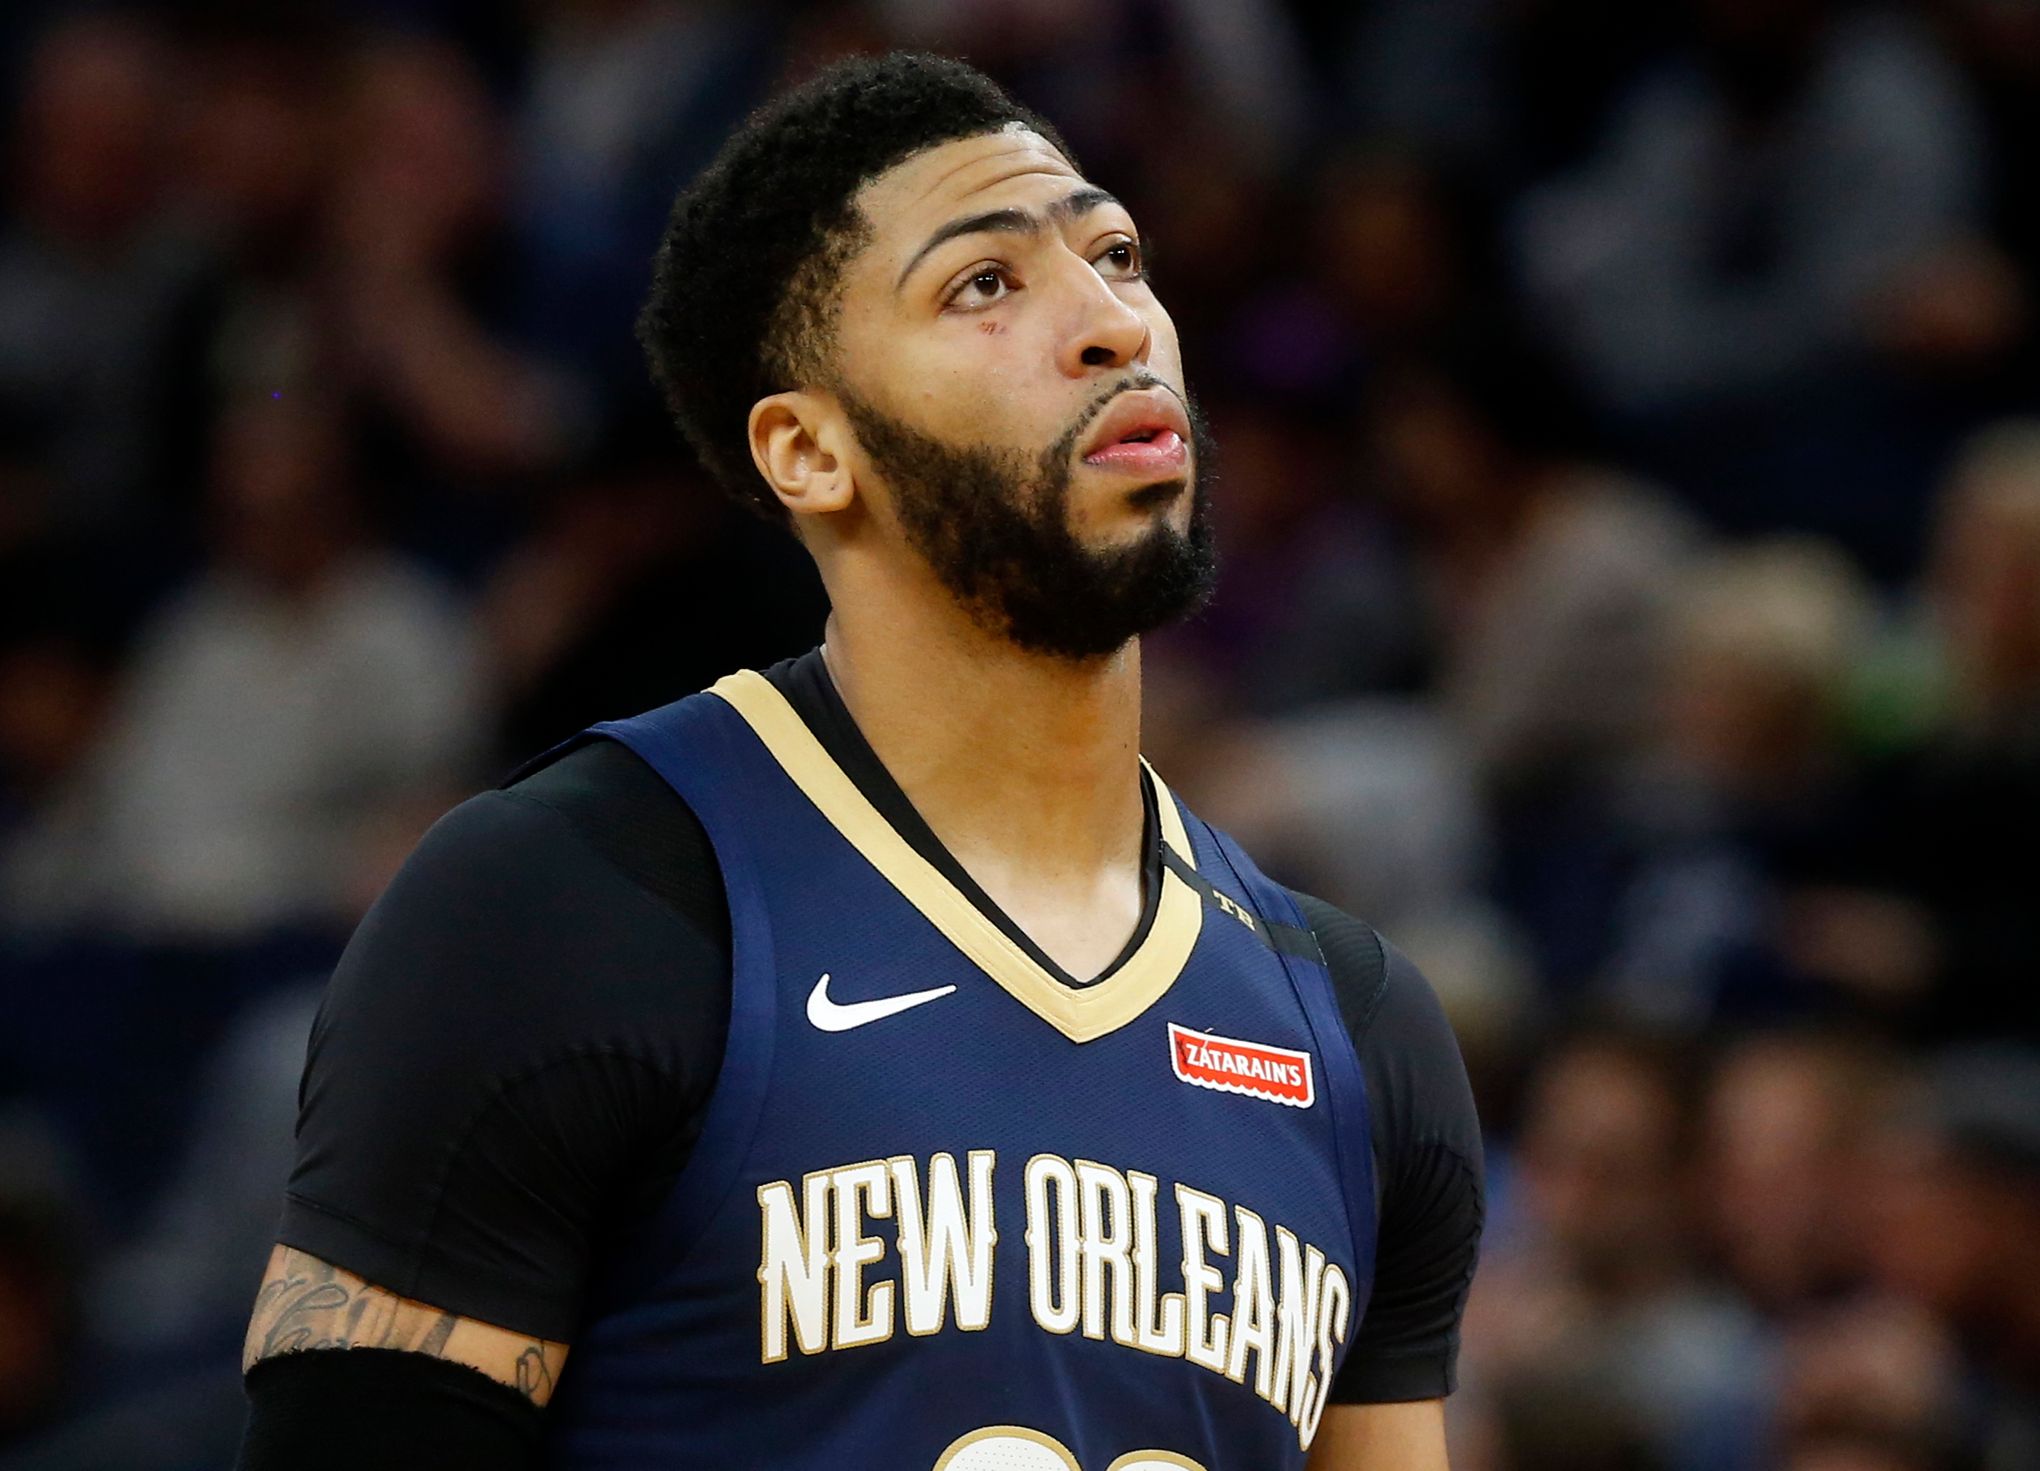 DeMarcus Cousins and Anthony Davis are the NBA's Most Dominant Frontcourt